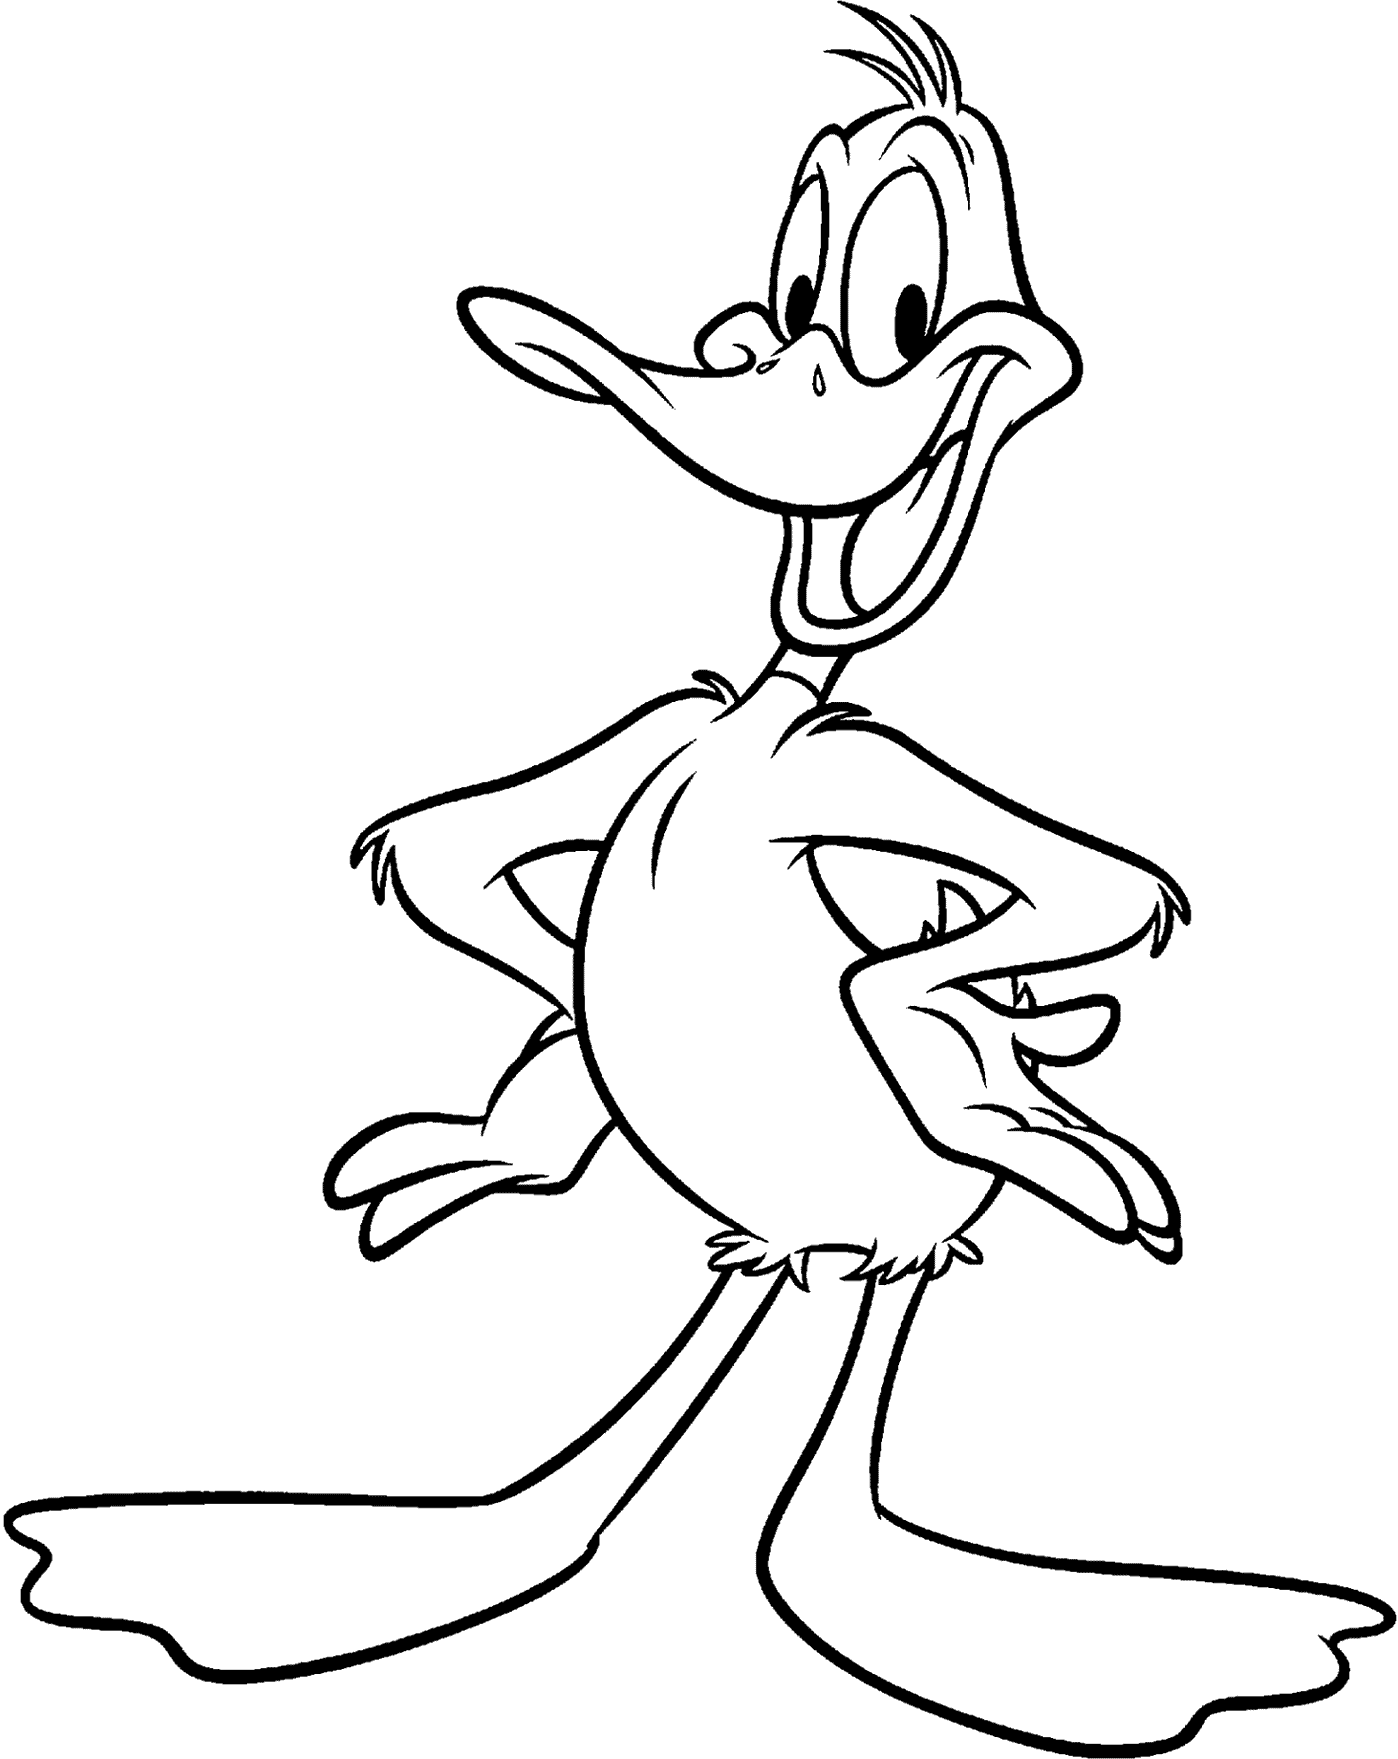 Daffy duck coloring pages to download and print for free